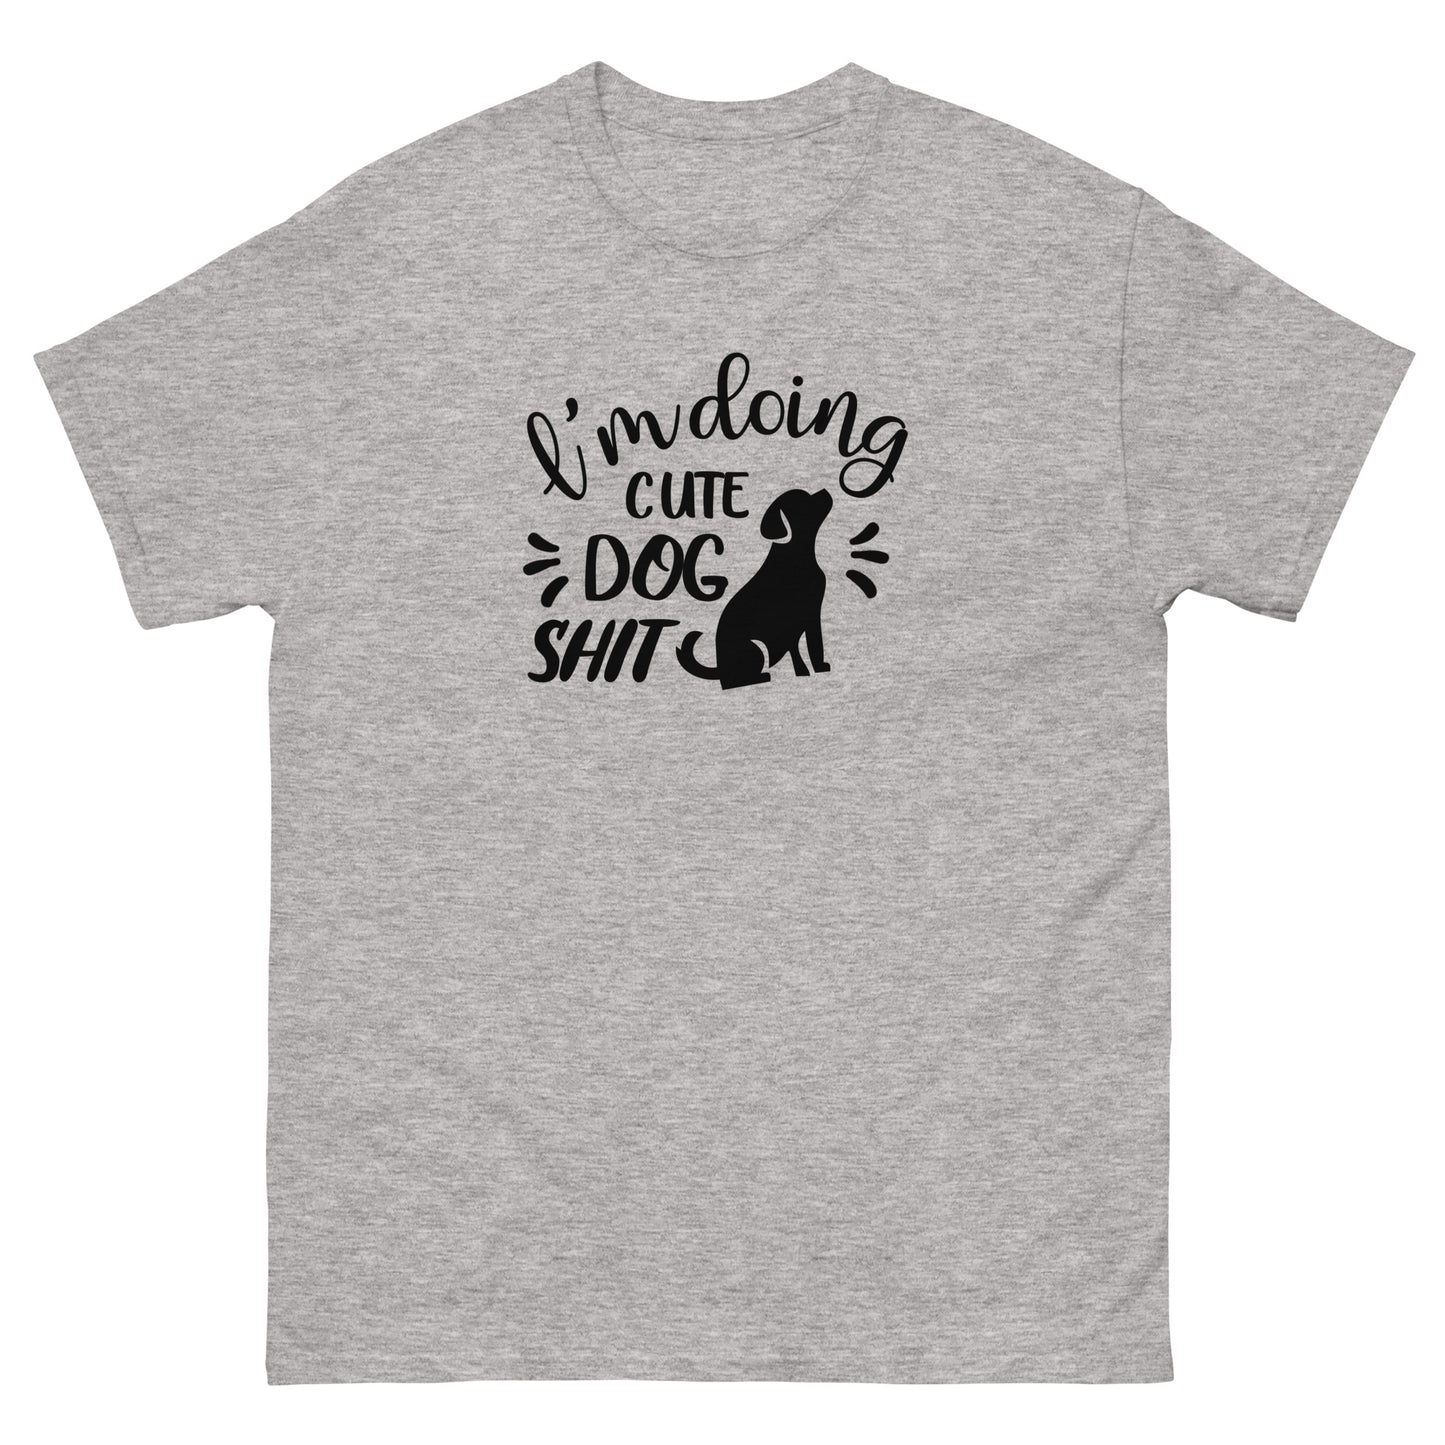 Dog Shirts With Funny Sayings - I am Doing Cute Dog Things